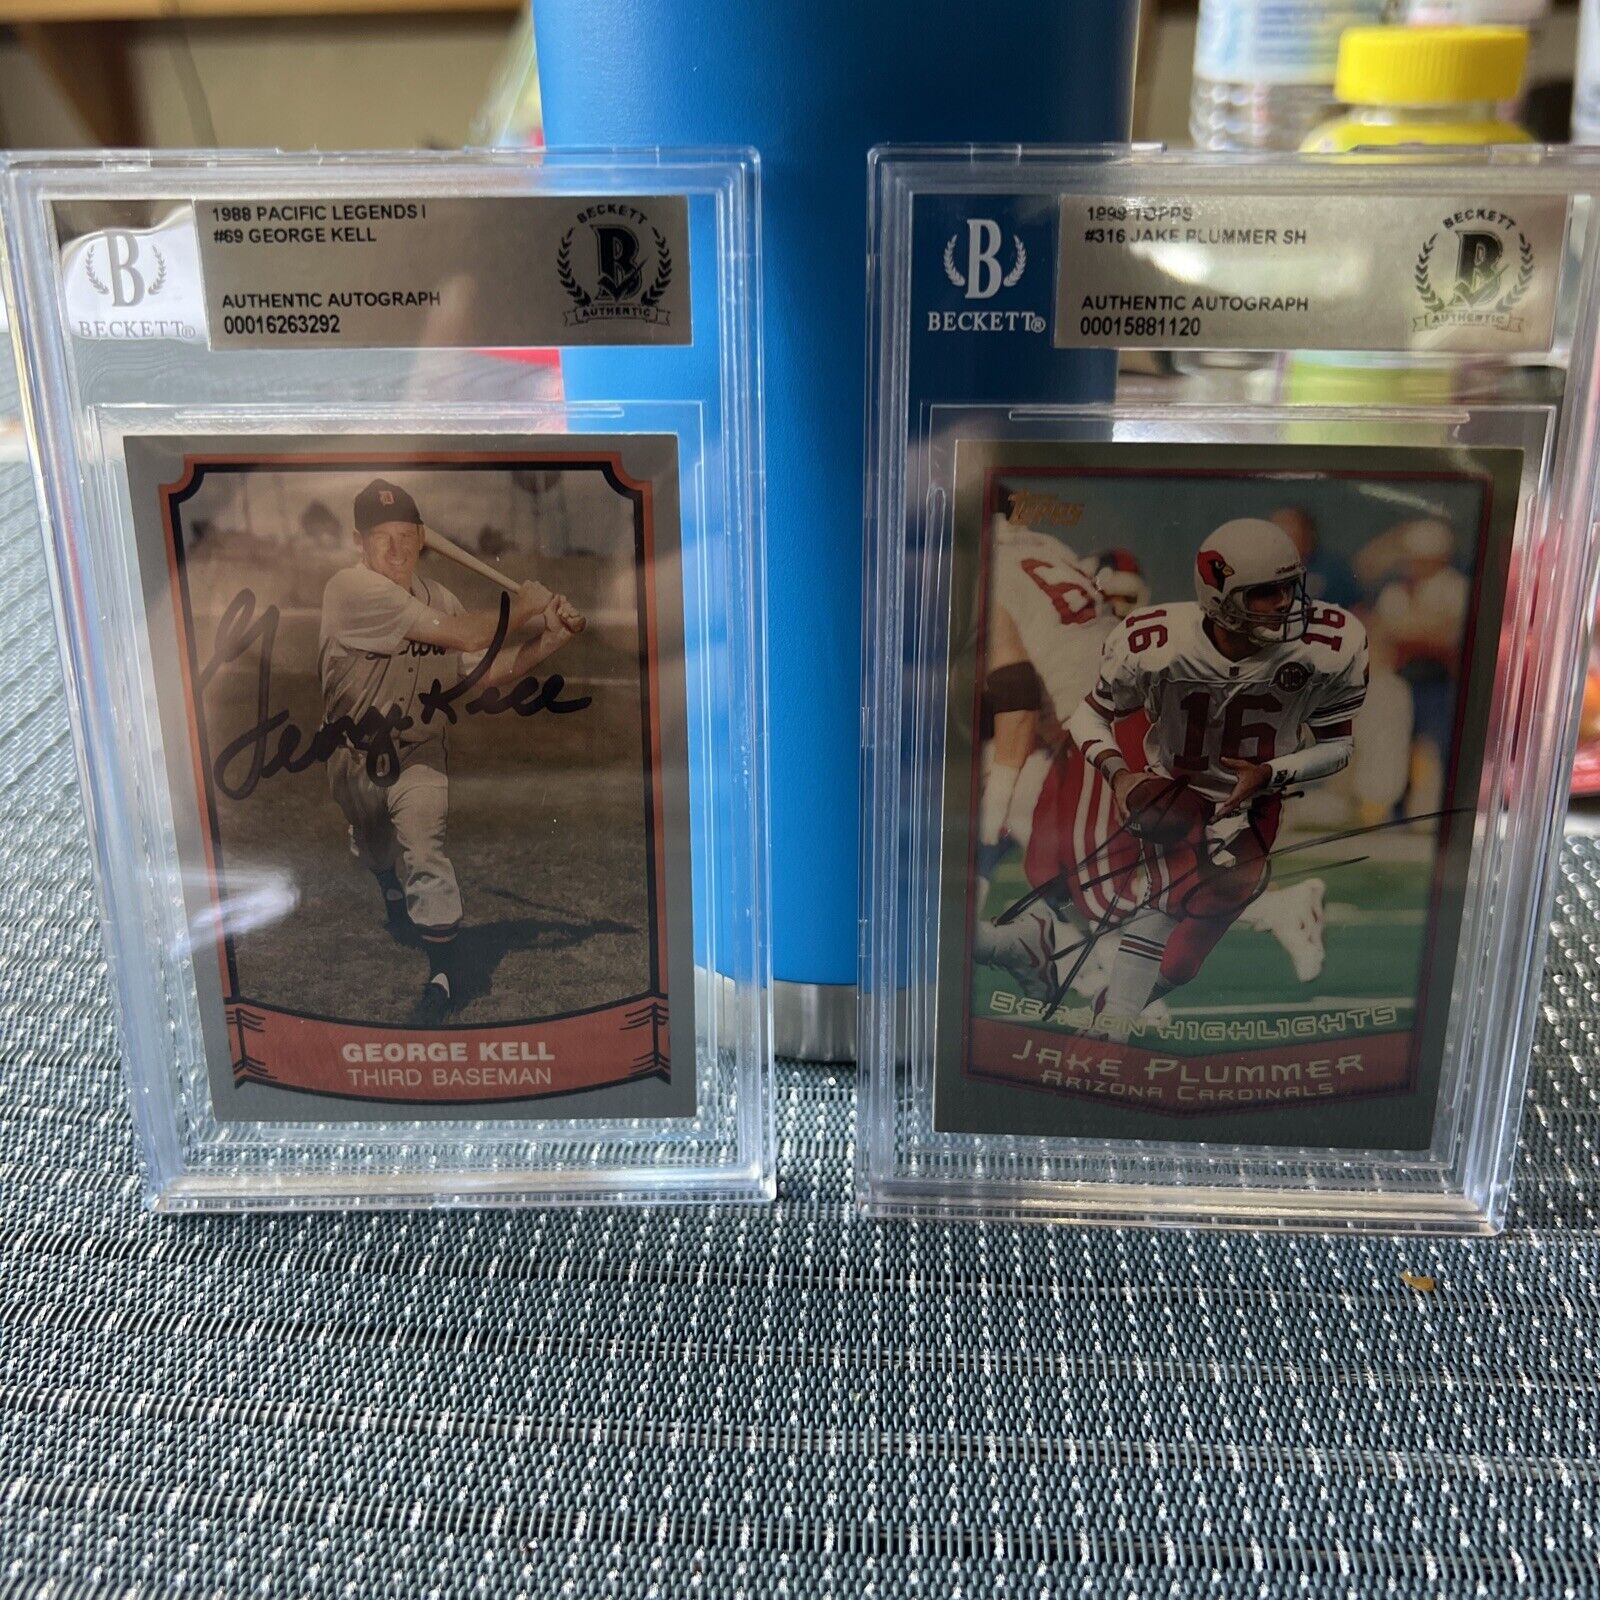 Two Autographed Cards 1998 Gorge Kell And 1999 Jake Plummer Topps 